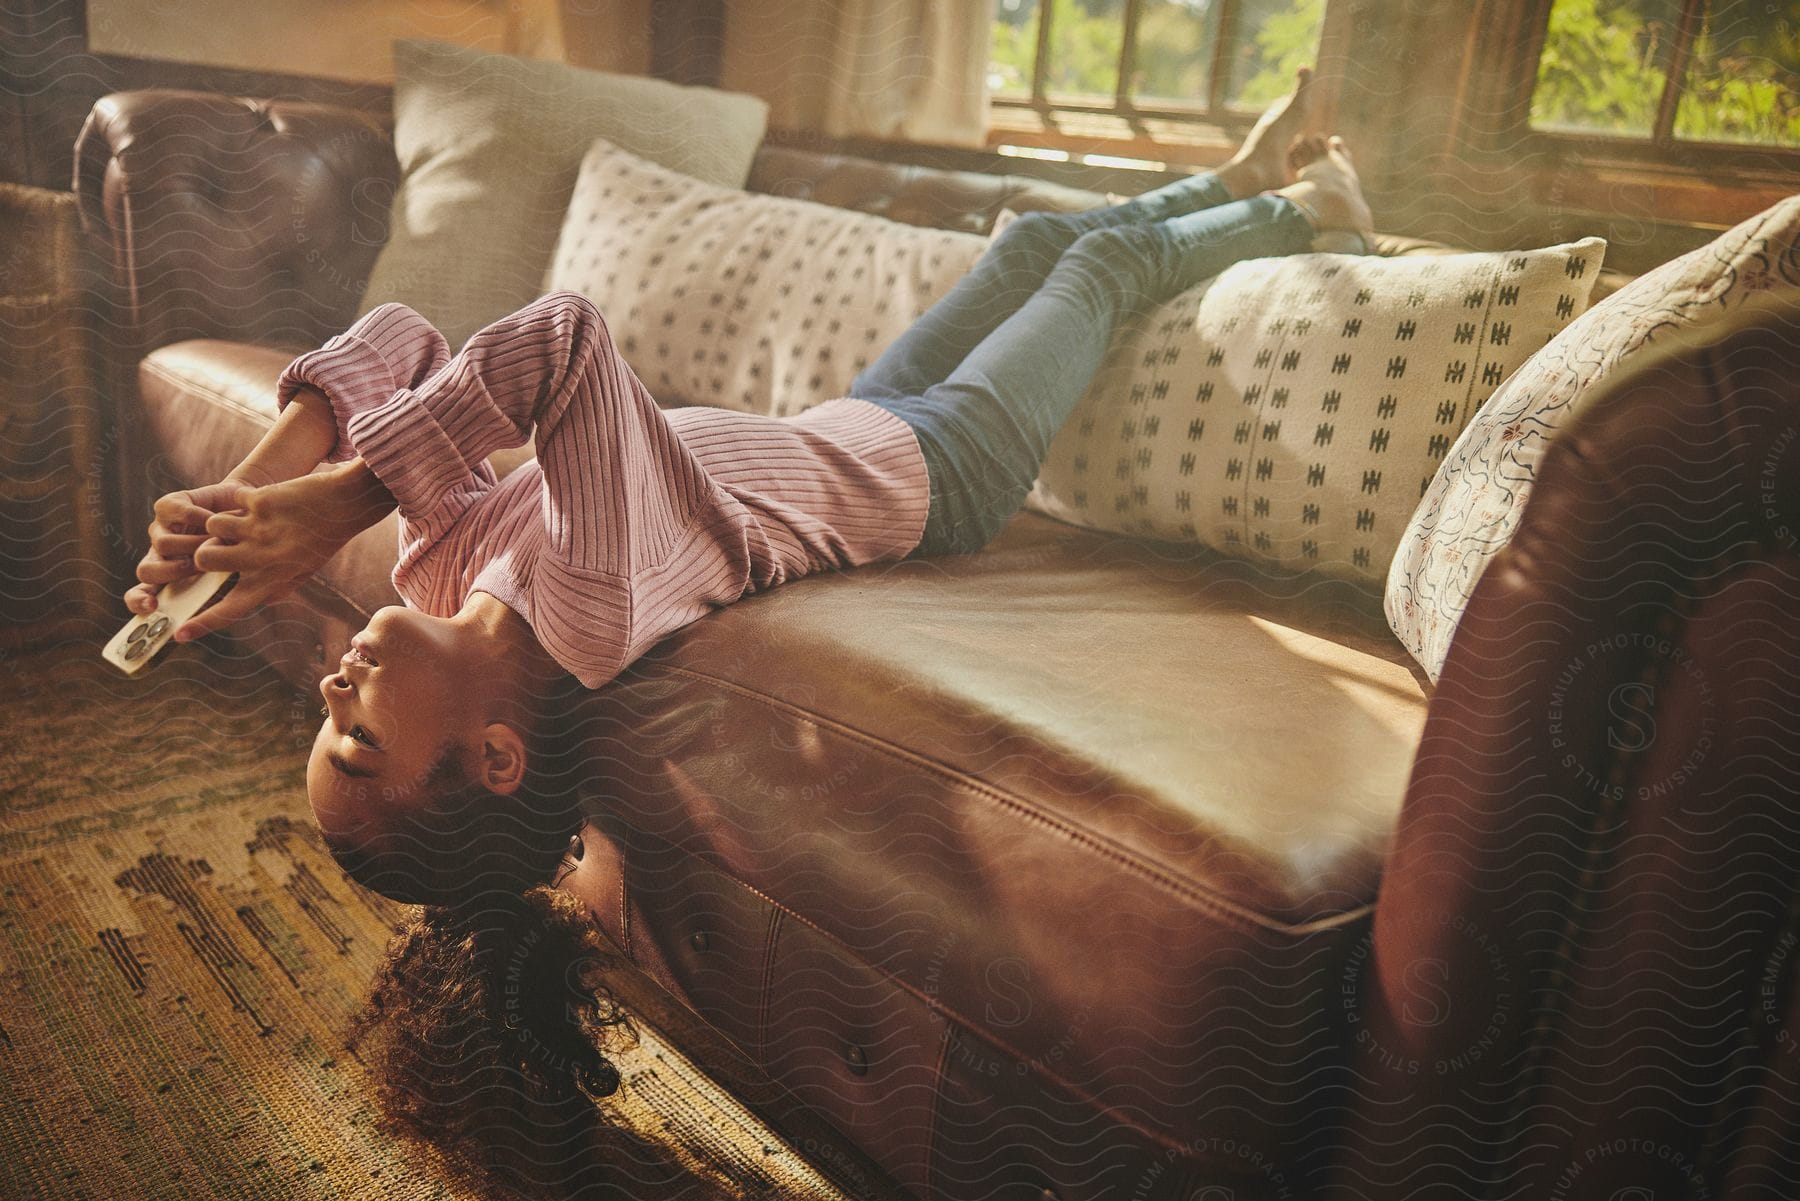 A young girl lies on her back on a sofa while looking at her smartphone.